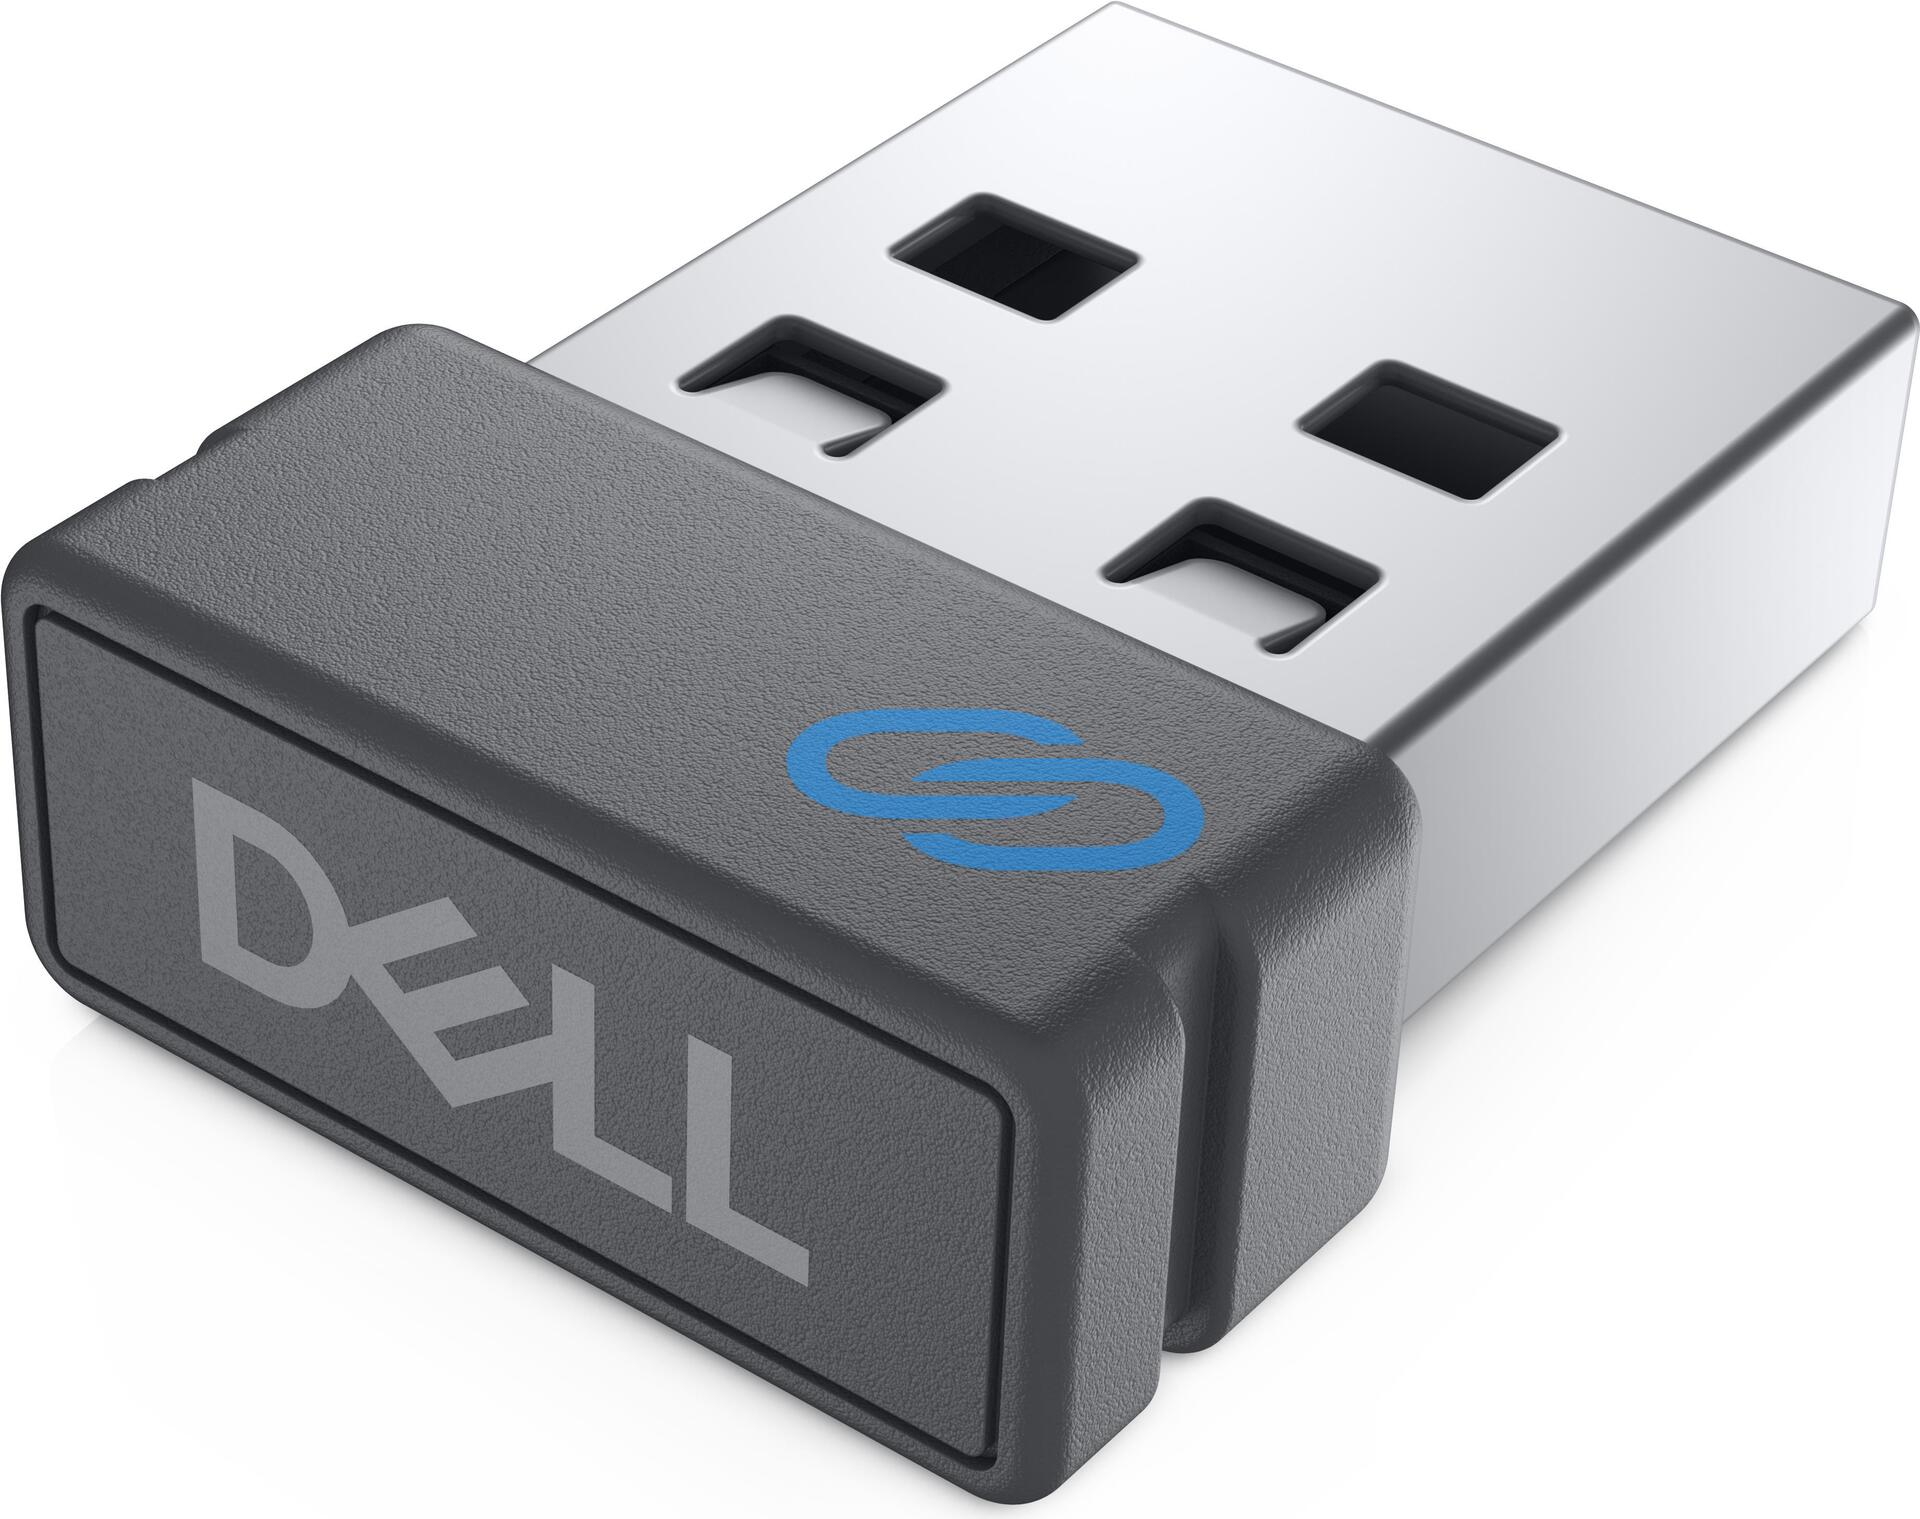 DELL WR221 USB-Receiver (570-ABKY)